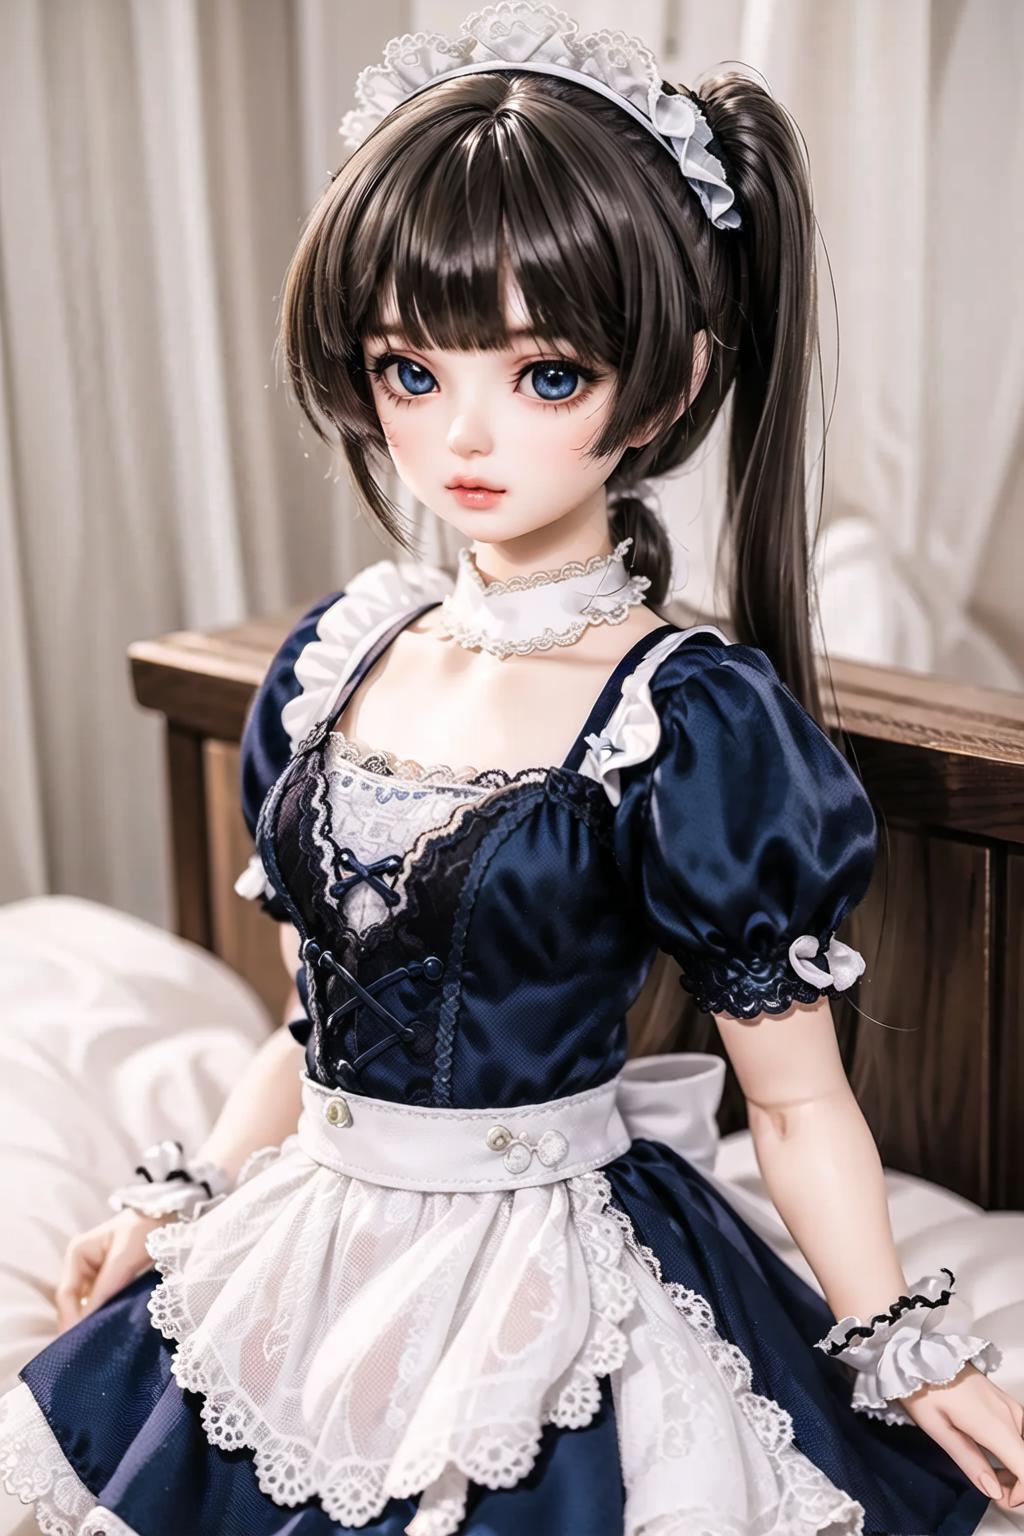 BJD Dolls Lora (male and female) image by set999